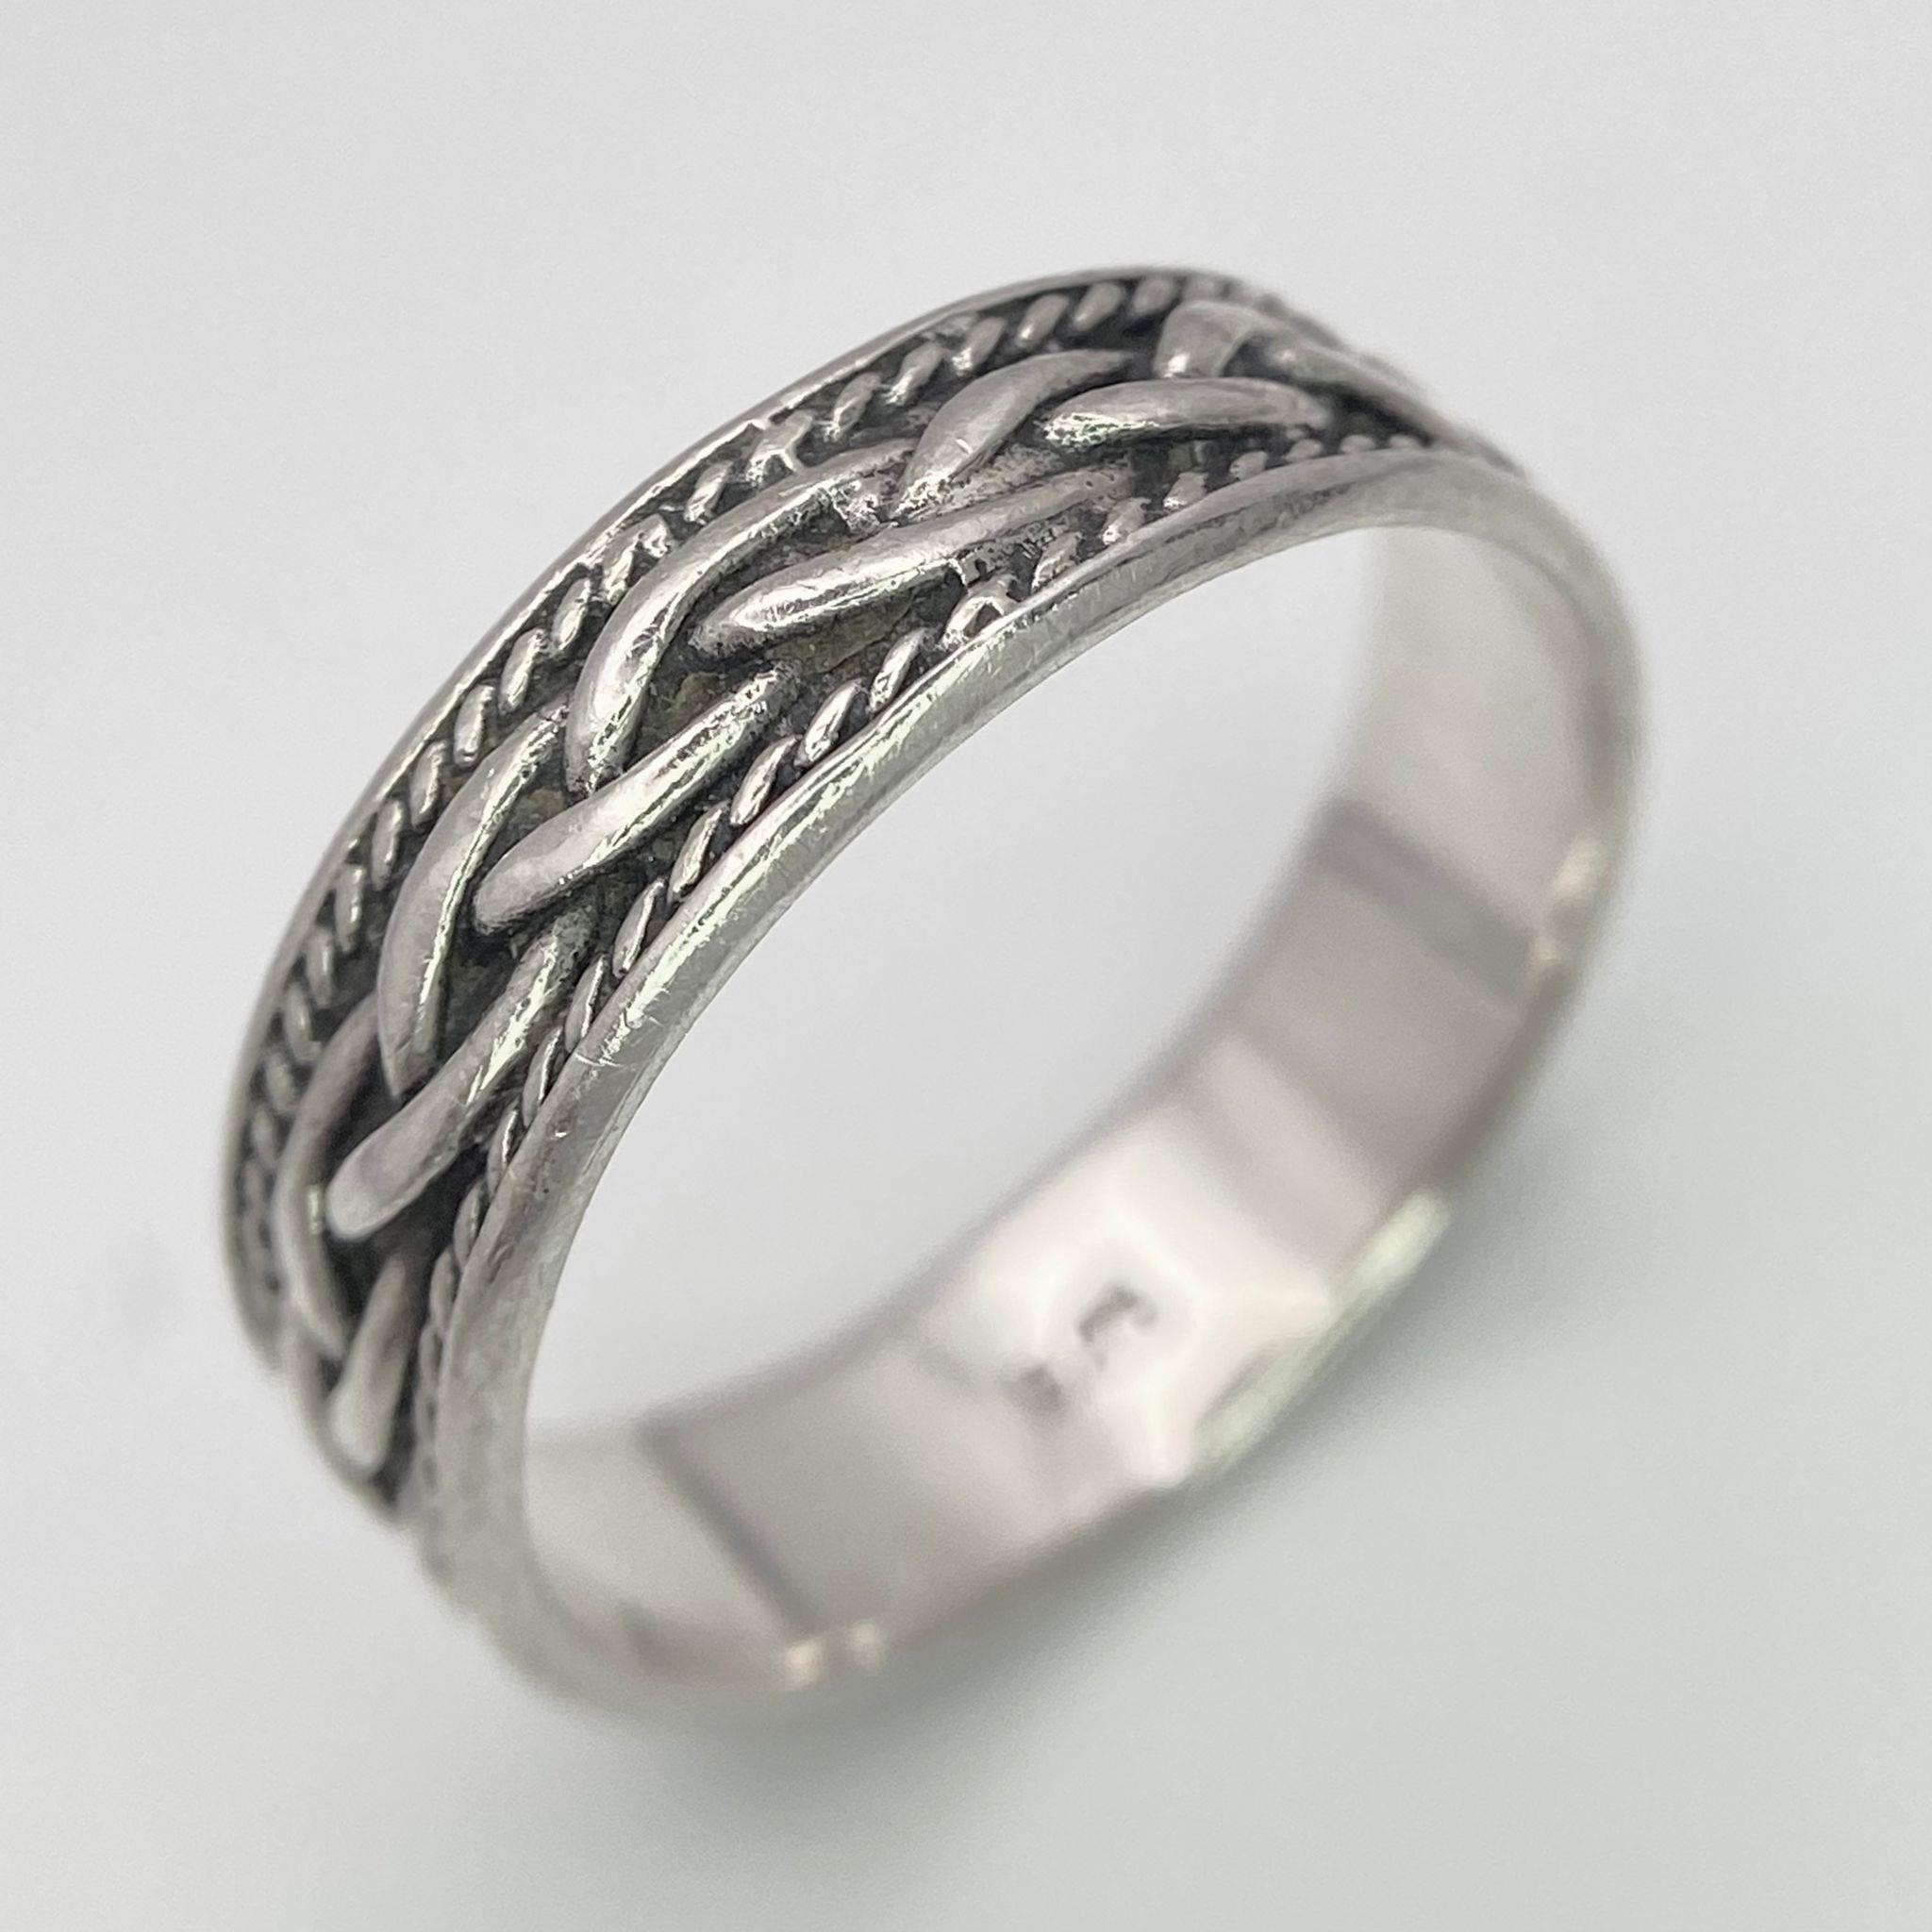 3X 925 silver band rings with different designs. Total weight 13.4G. Size U, V, R/S. - Image 6 of 13